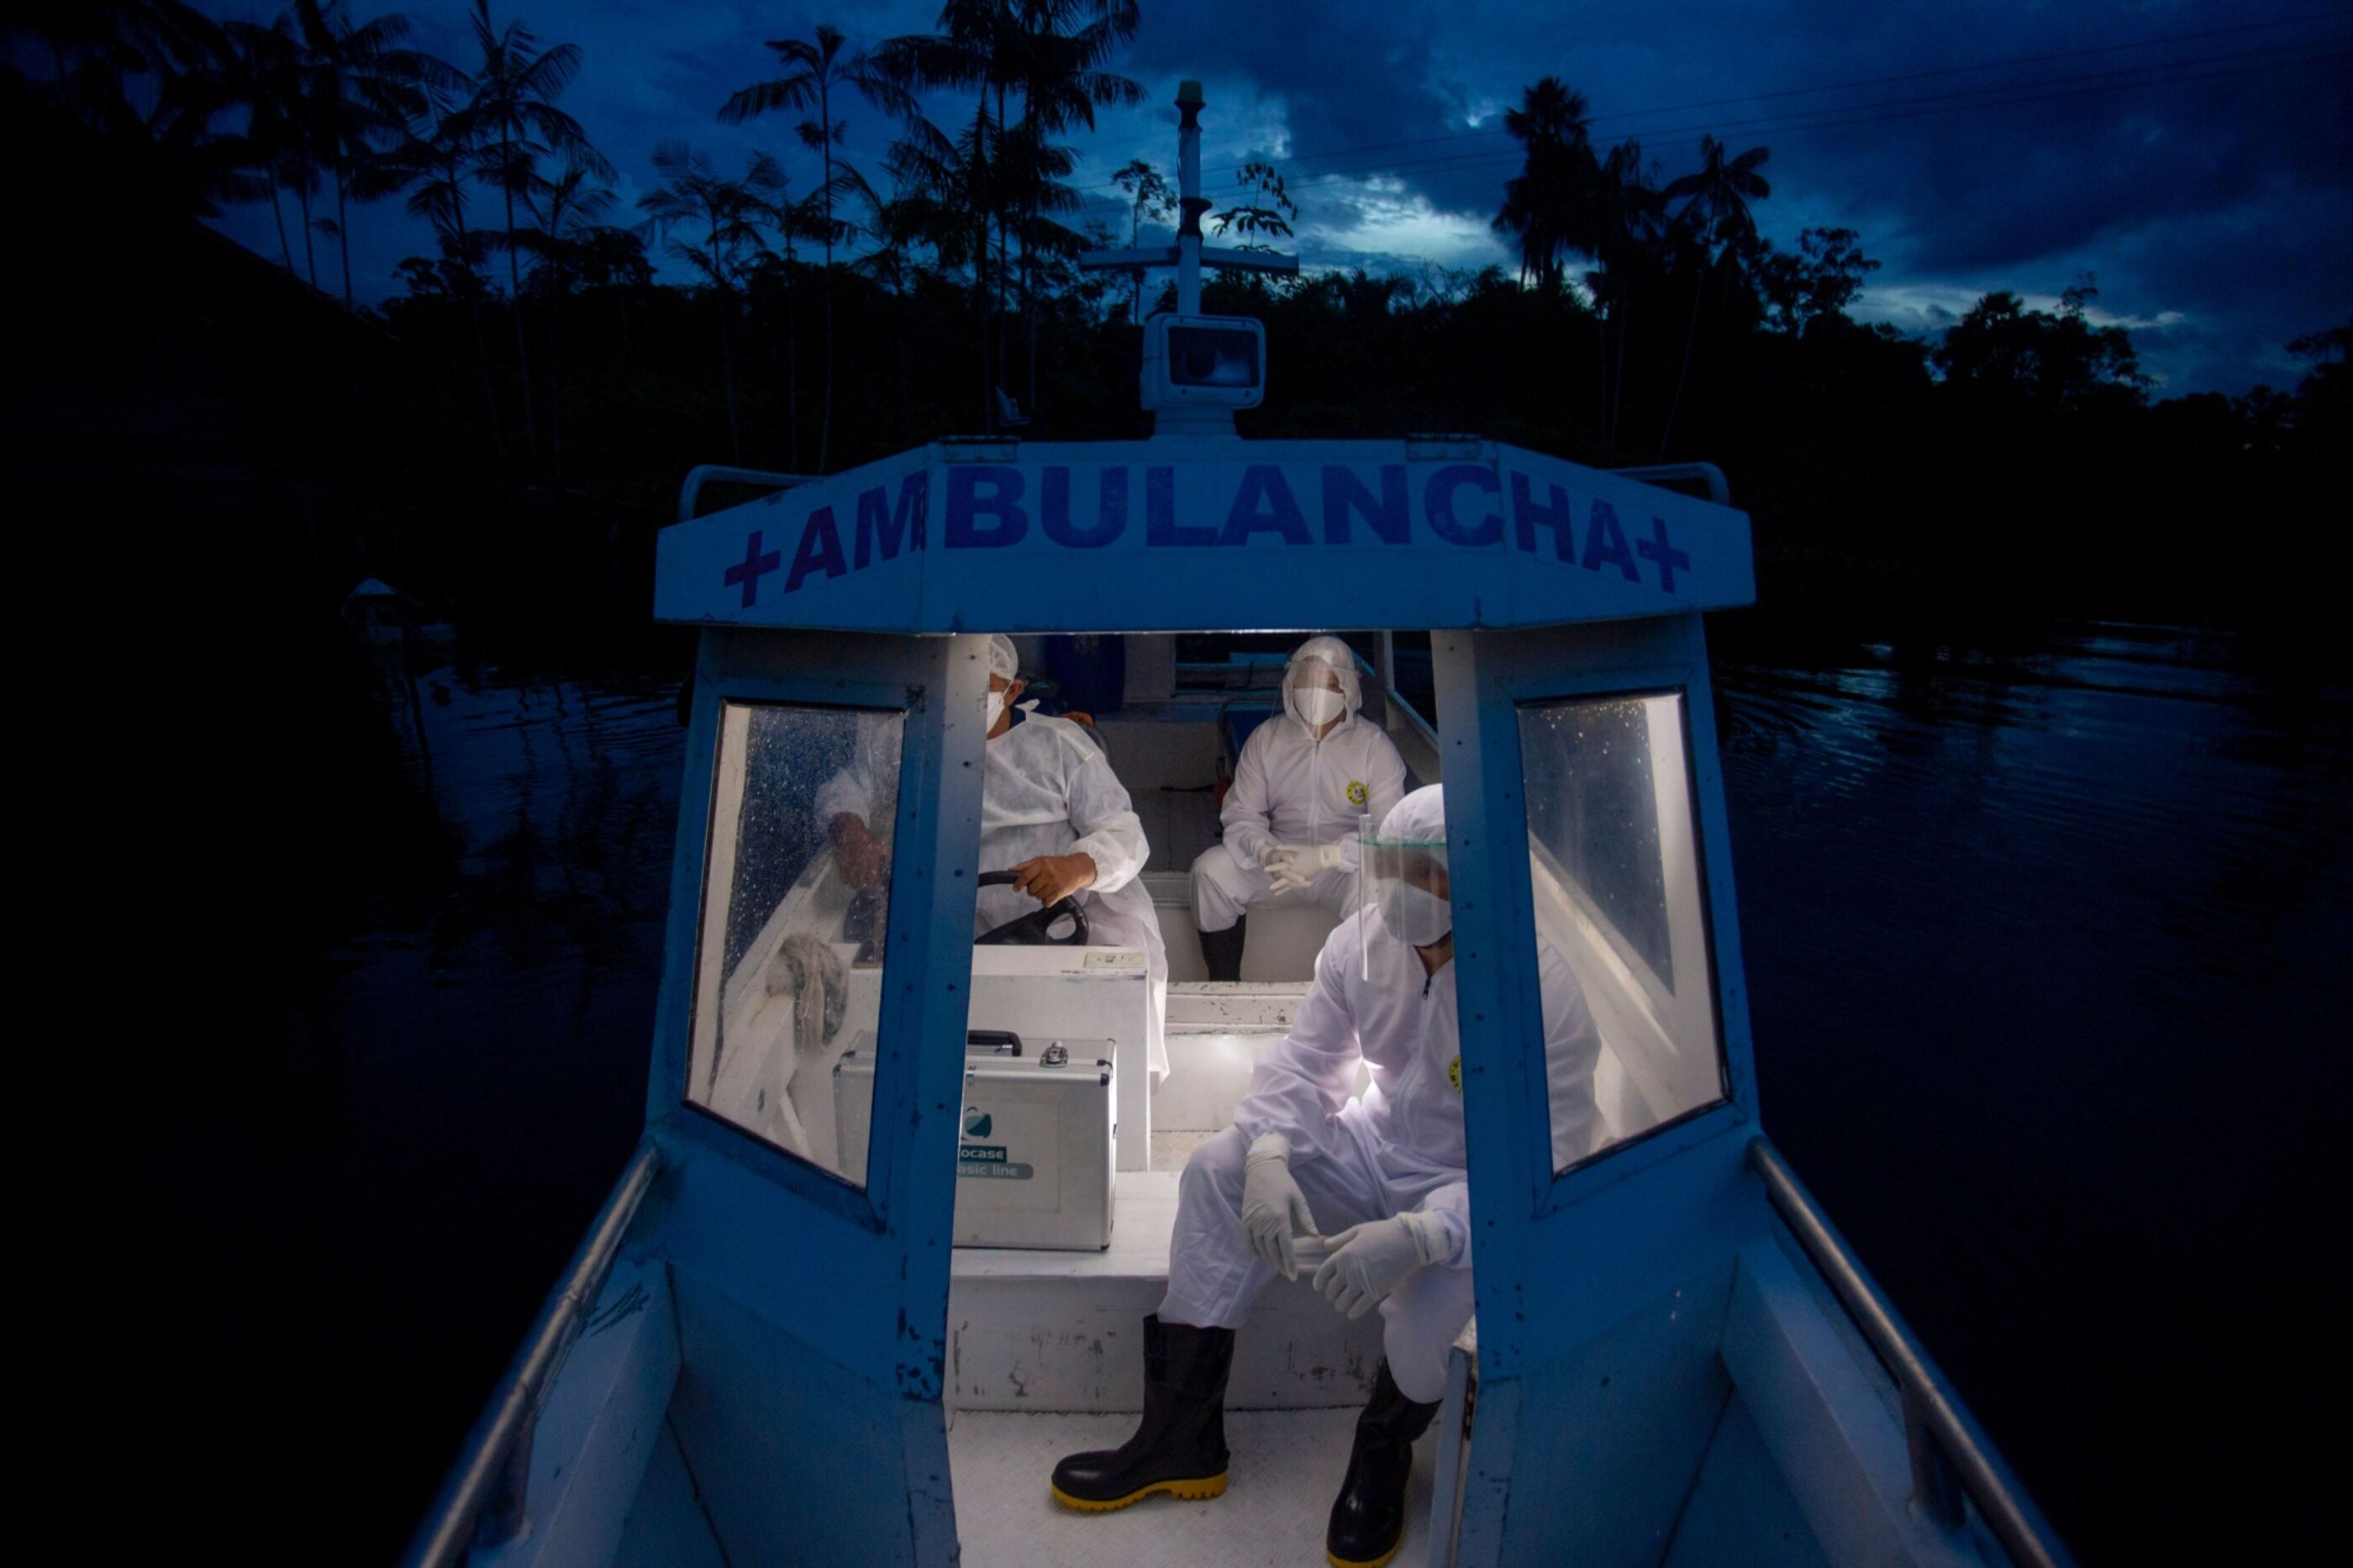 Three health workers in protective white jumpsuits, face masks and face shields ride in a small boat at night.